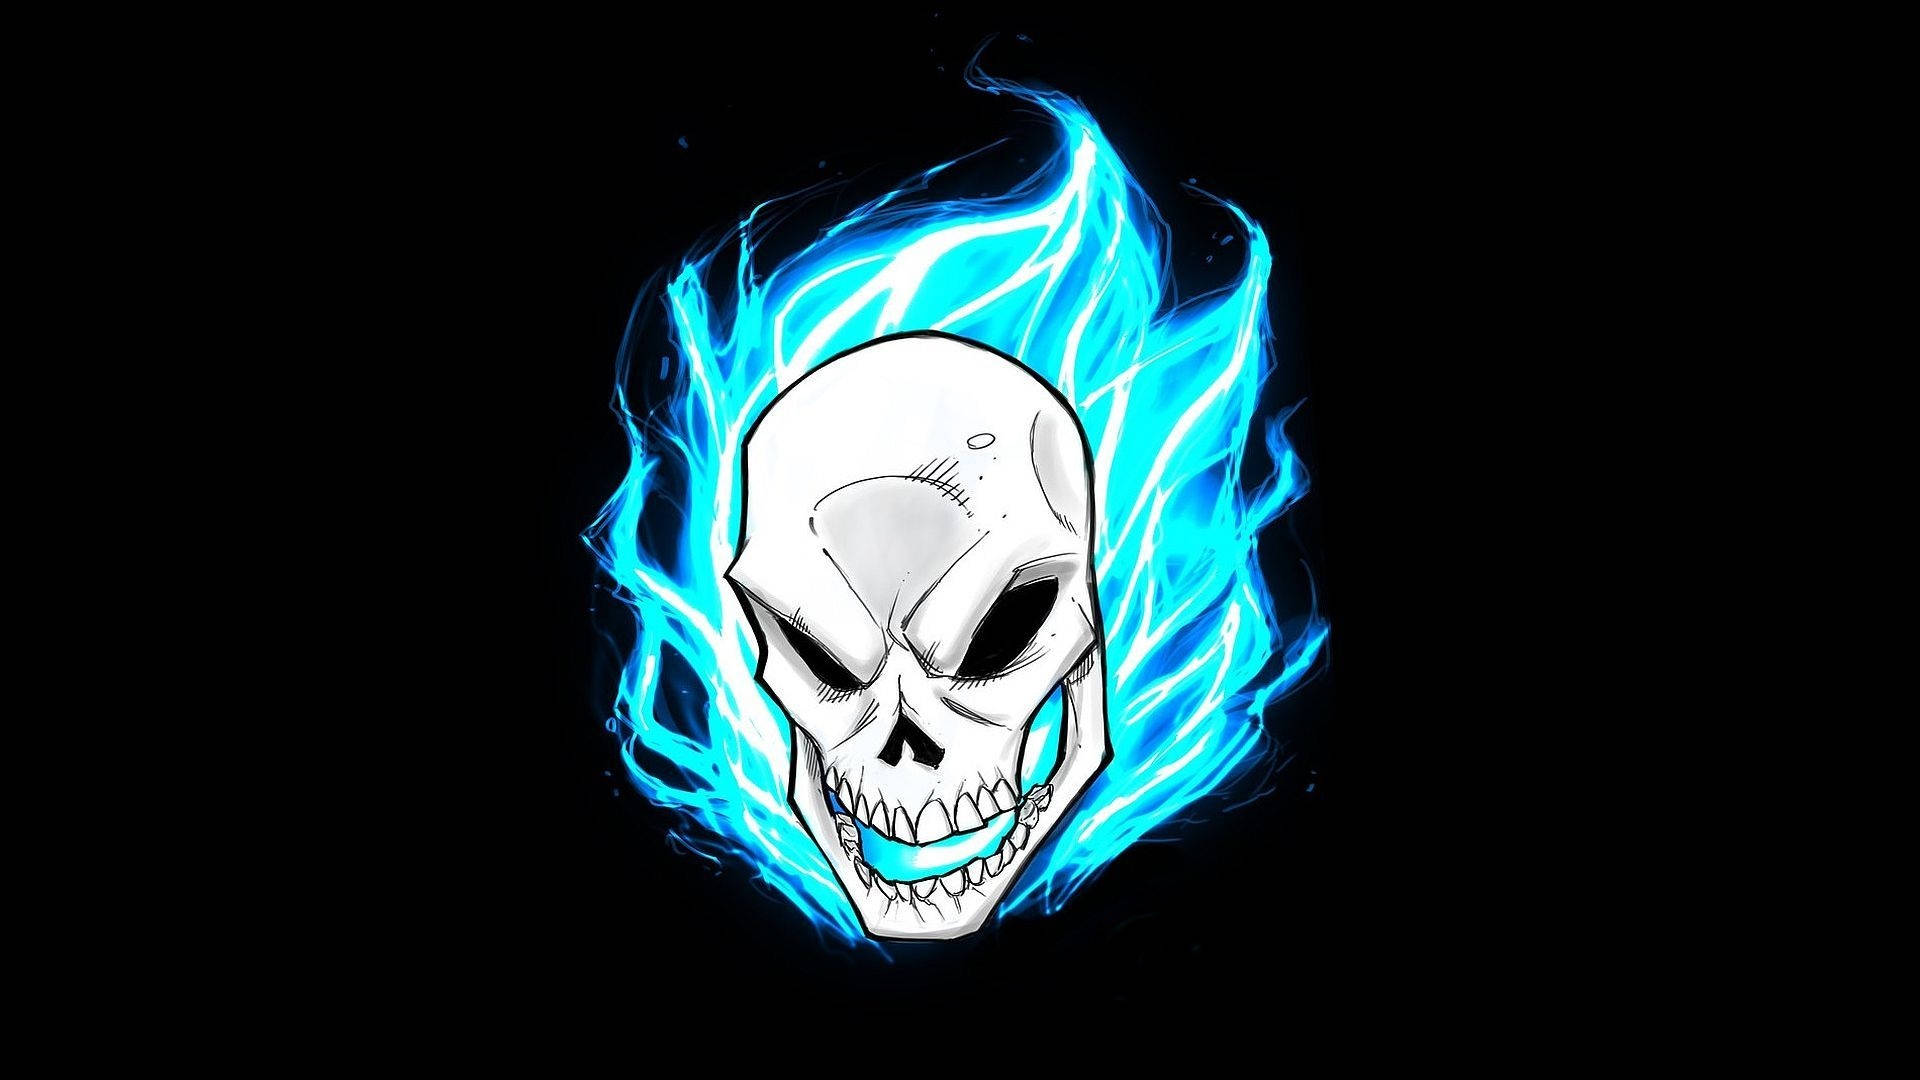 Rider Ghost Aesthetic Blue Flame Background